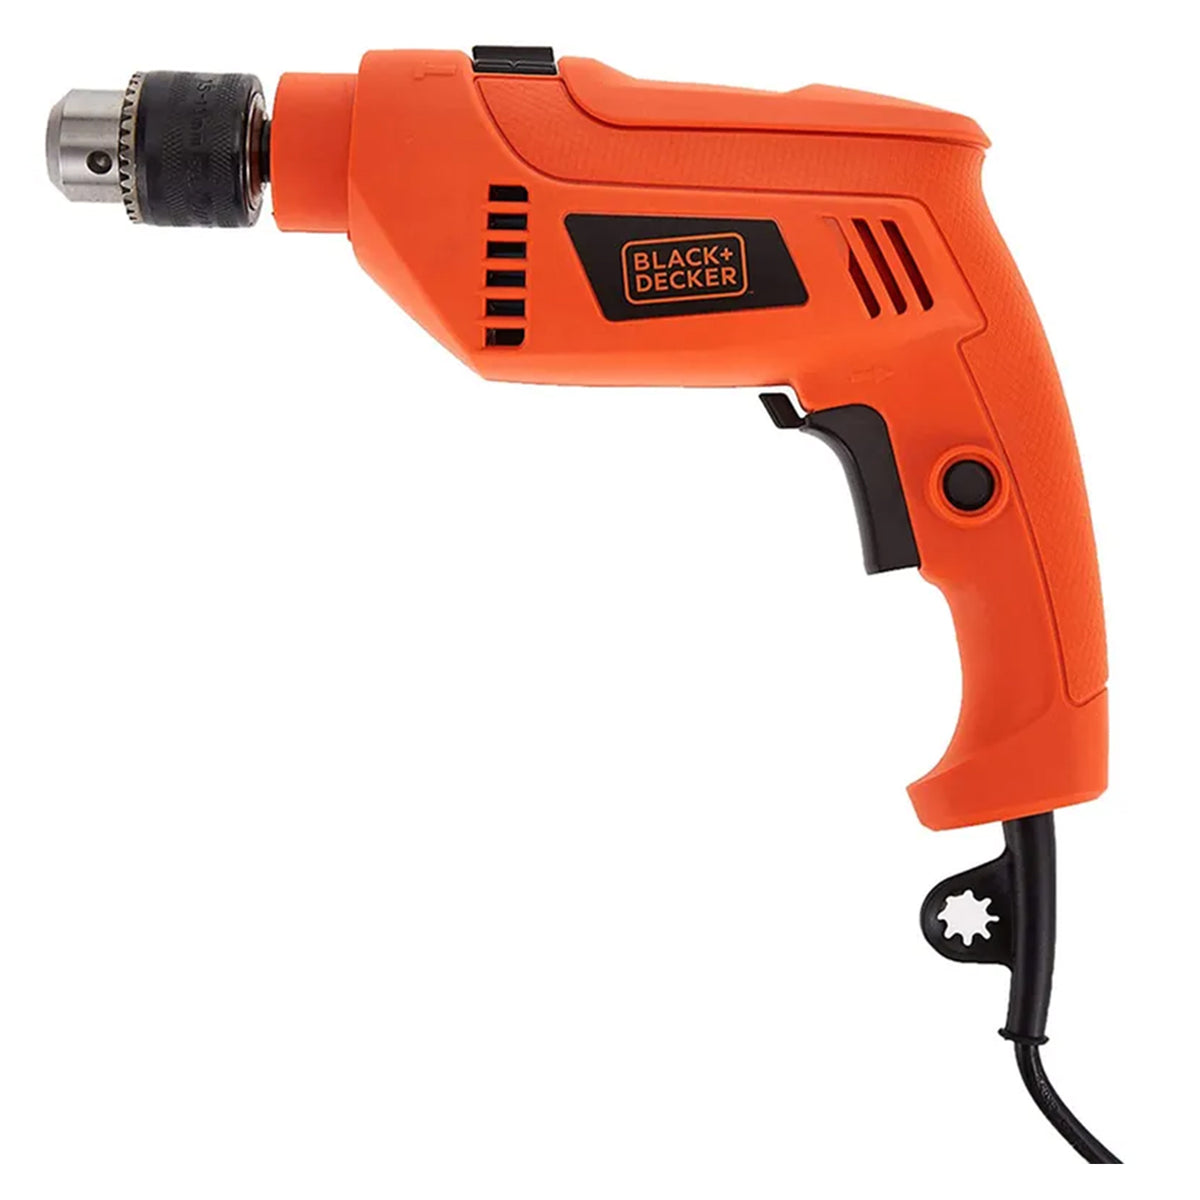 Corded hammer drill, Orange and BlackPower: 650 wats